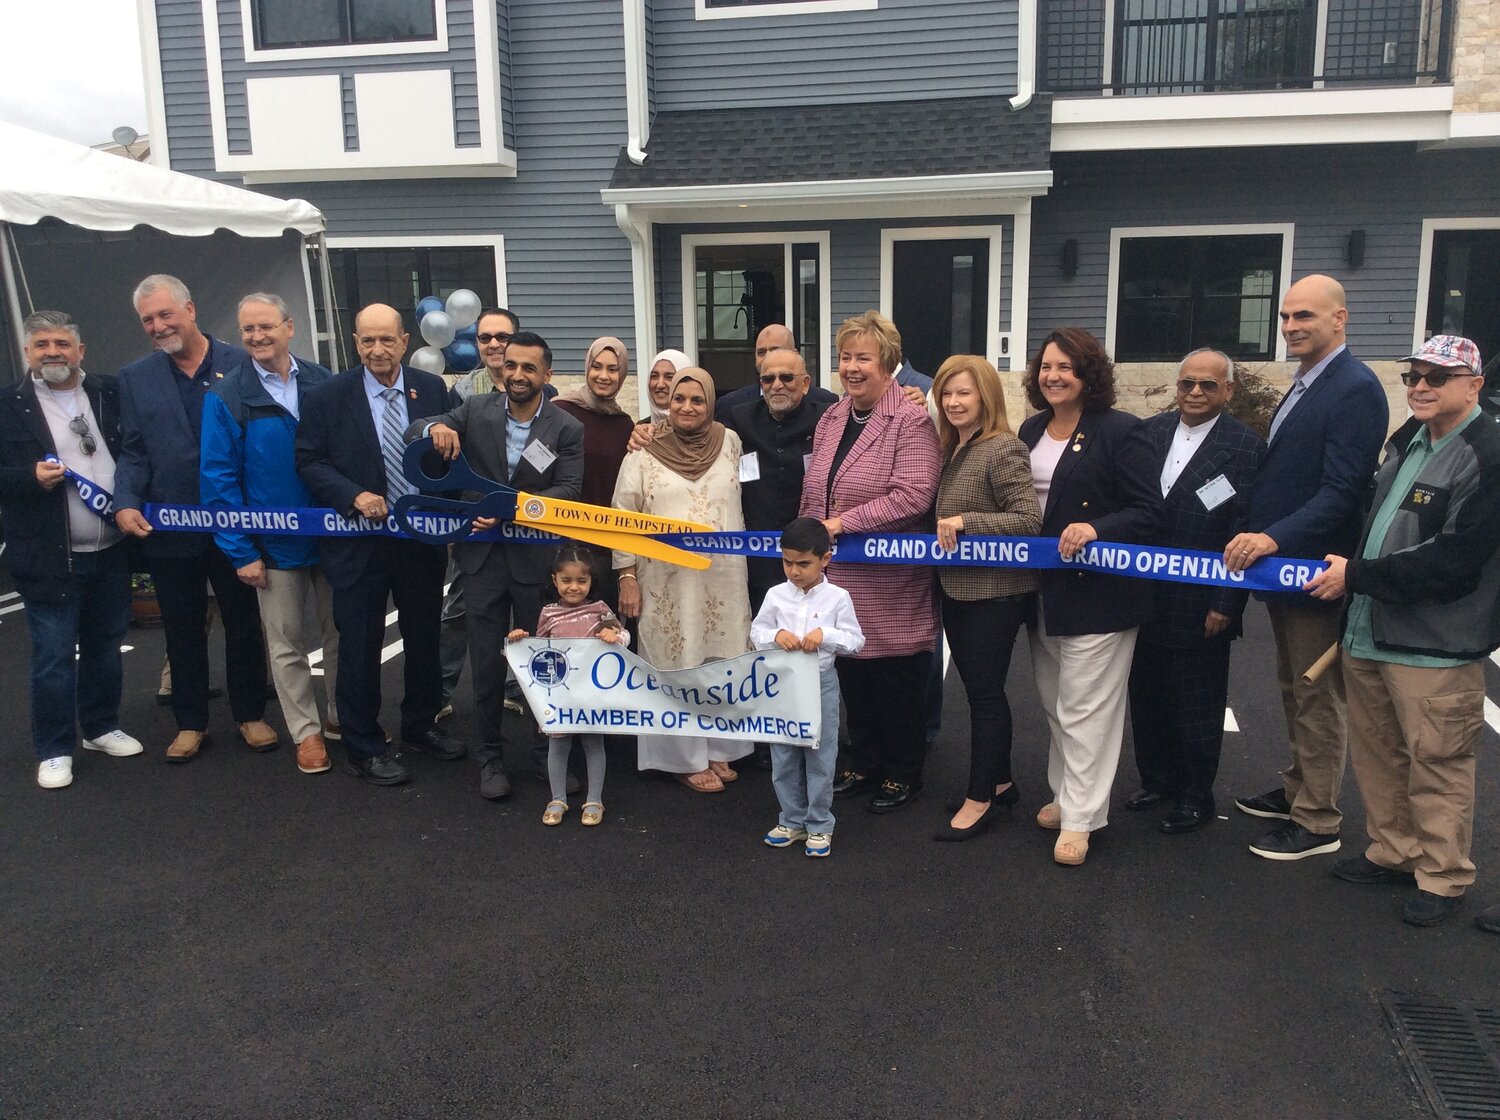 Community members and town officals came to celebrate the completion of the local private apartment complex on 418 Atlantic Avenue, the Inlet, financed by Oceanside residents Usman and Ubaid Bandukra.